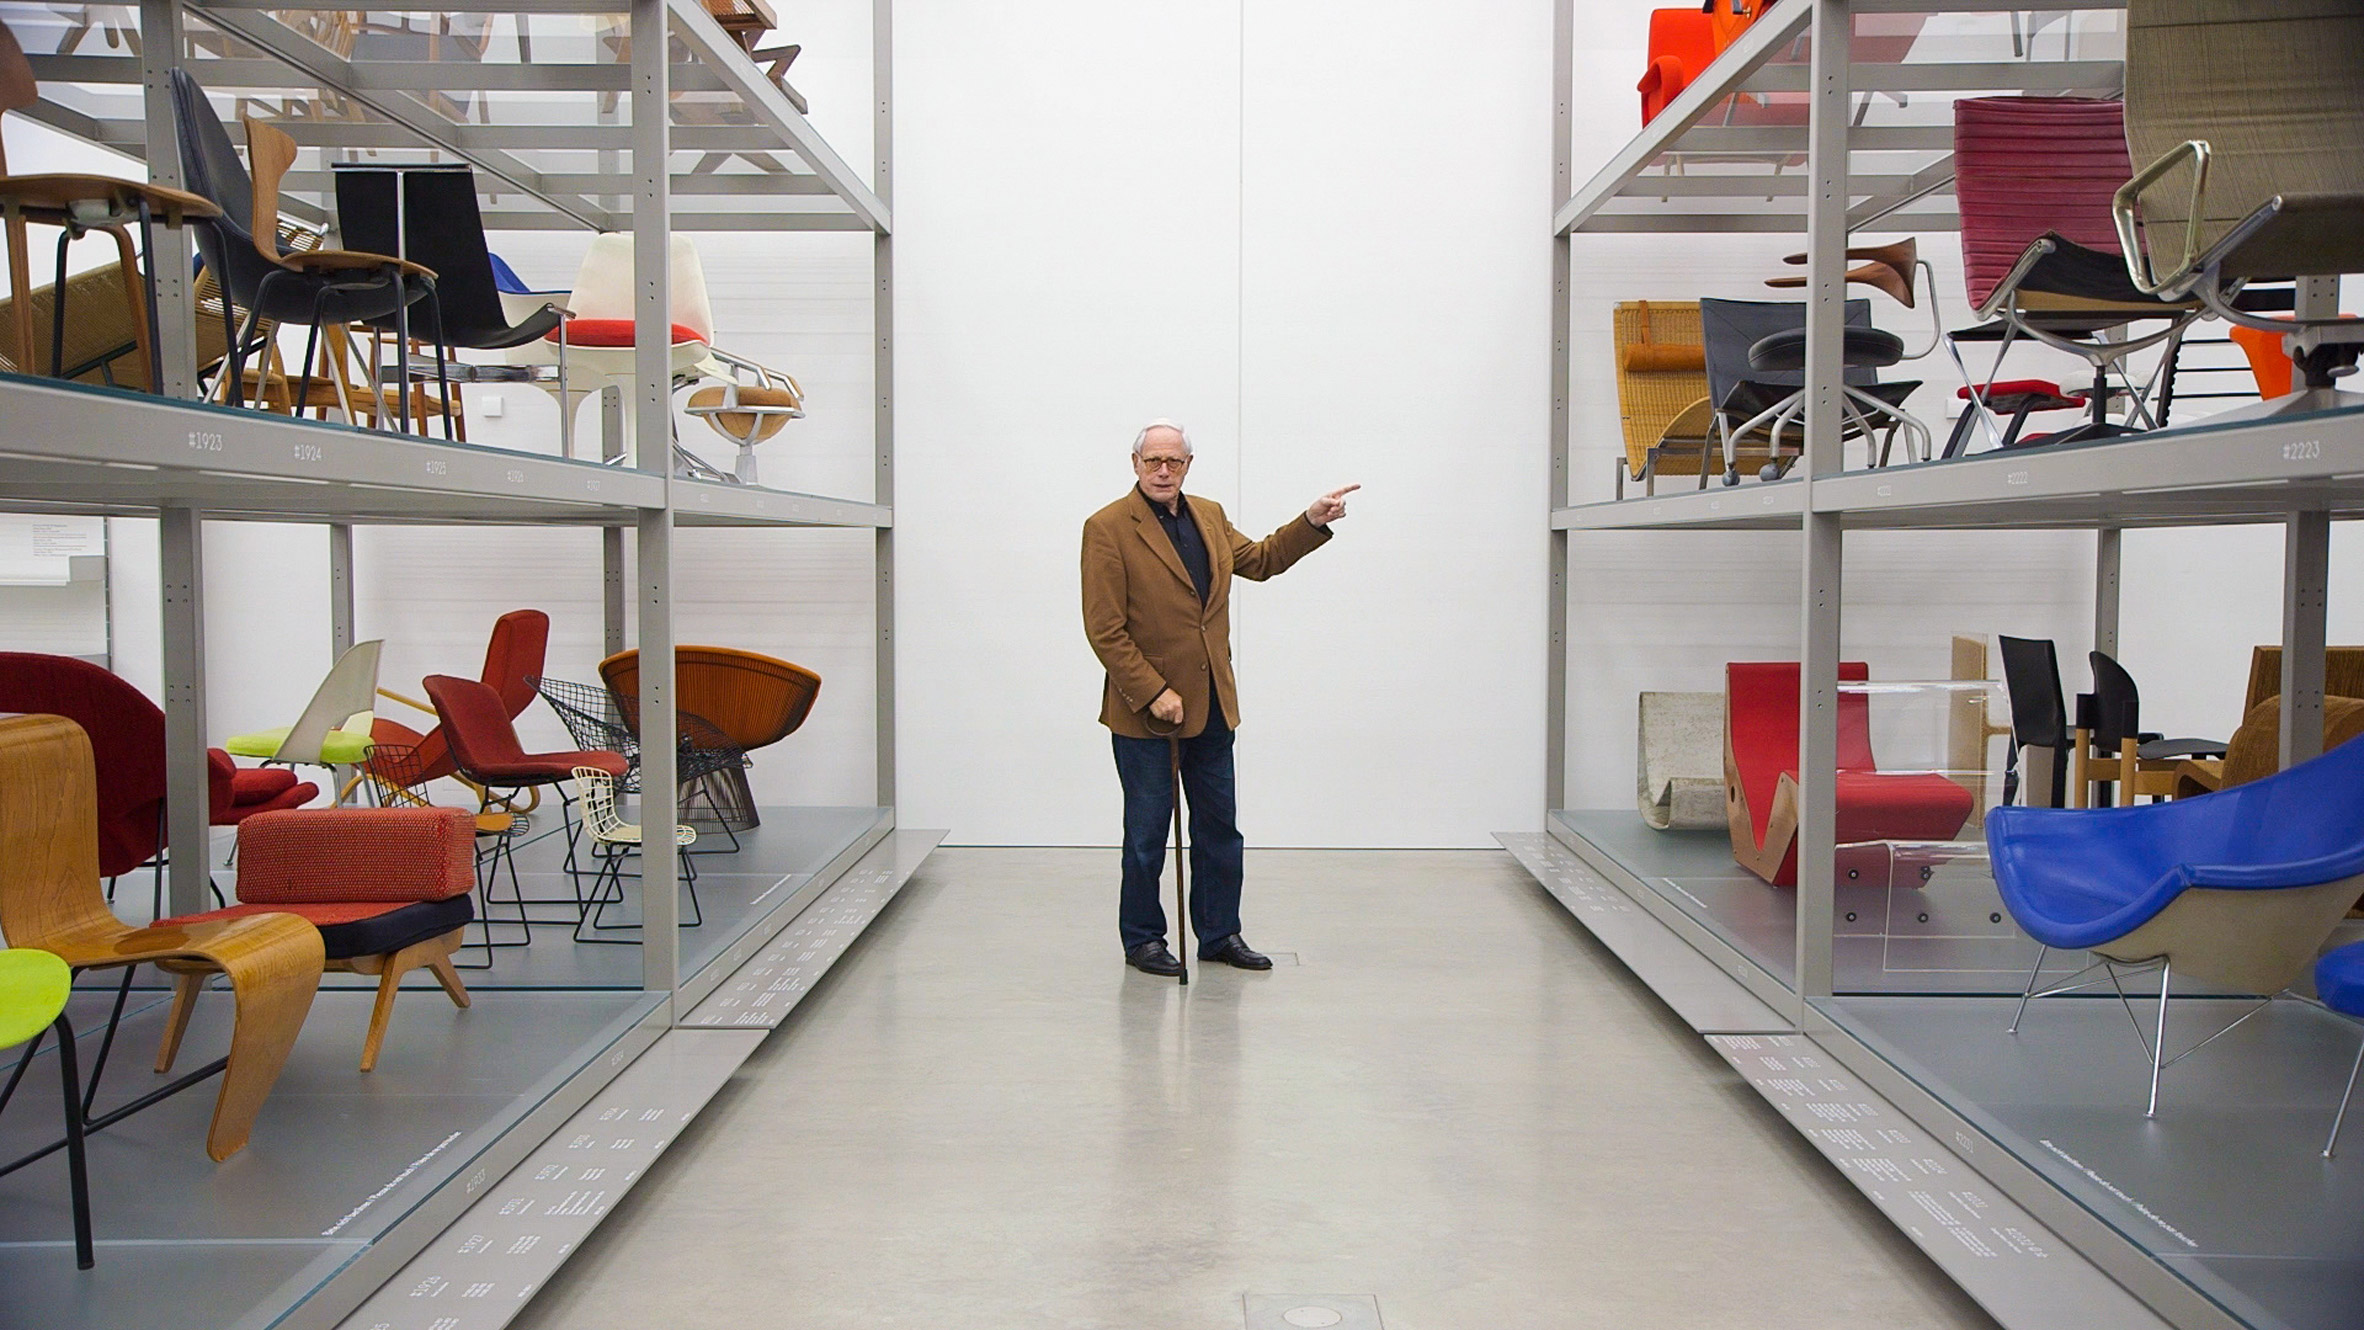 Dieter Rams contributing to culture of overconsumption"